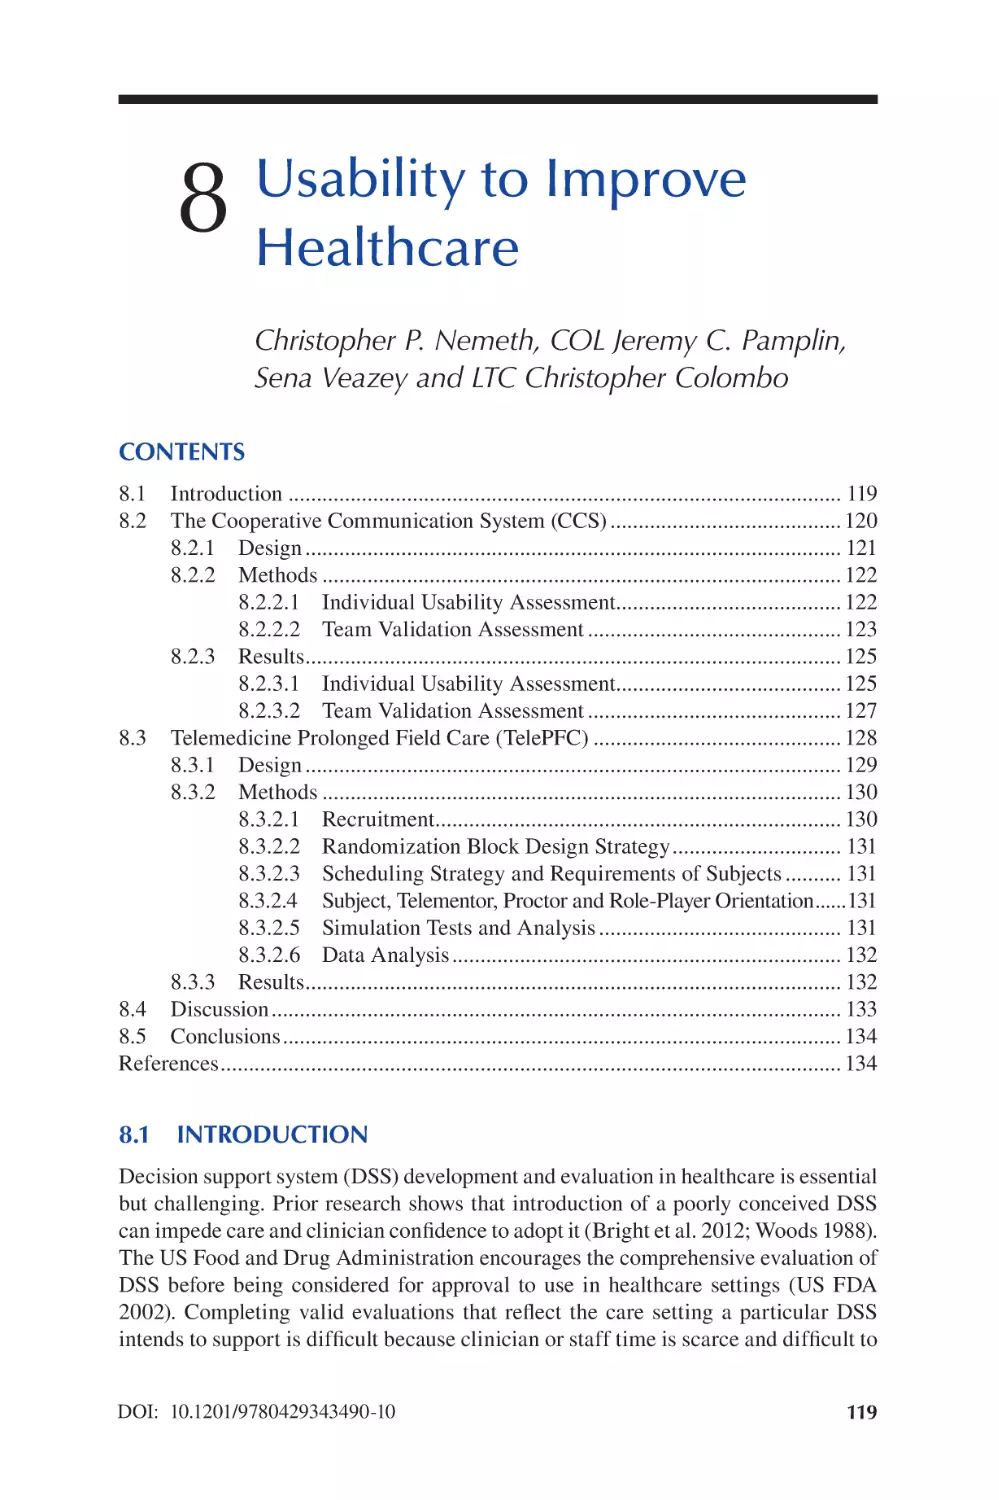 Chapter 8 Usability to Improve Healthcare
8.1 Introduction